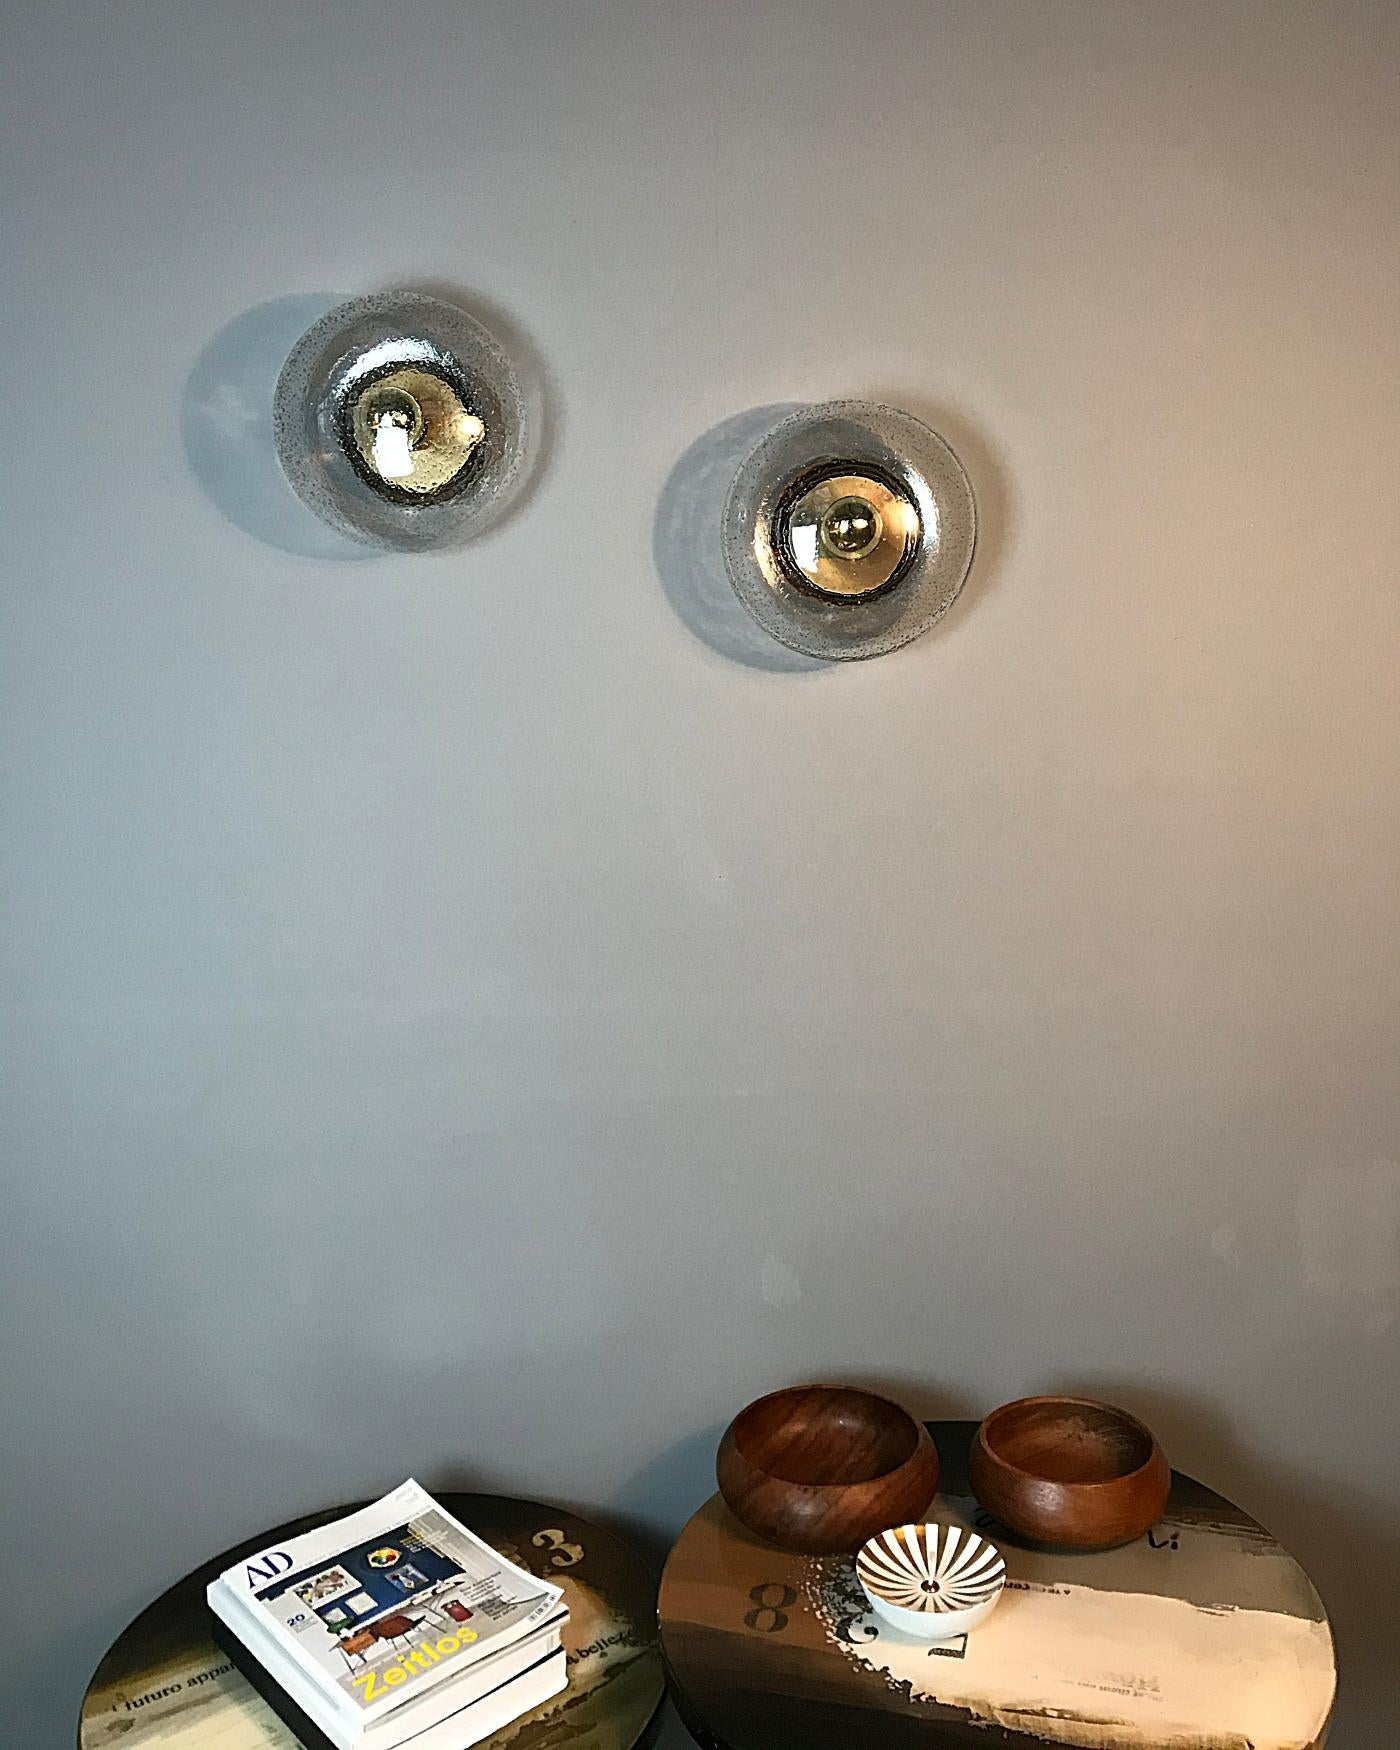 Pair of beautiful wall or ceiling lamps manufactured by Hillebrand in 1970s. They are featuring a brushed brass reflective base with a hand blown glass shade.
Fully working and tested condition with one E27 Edison socket each, the lamps work on